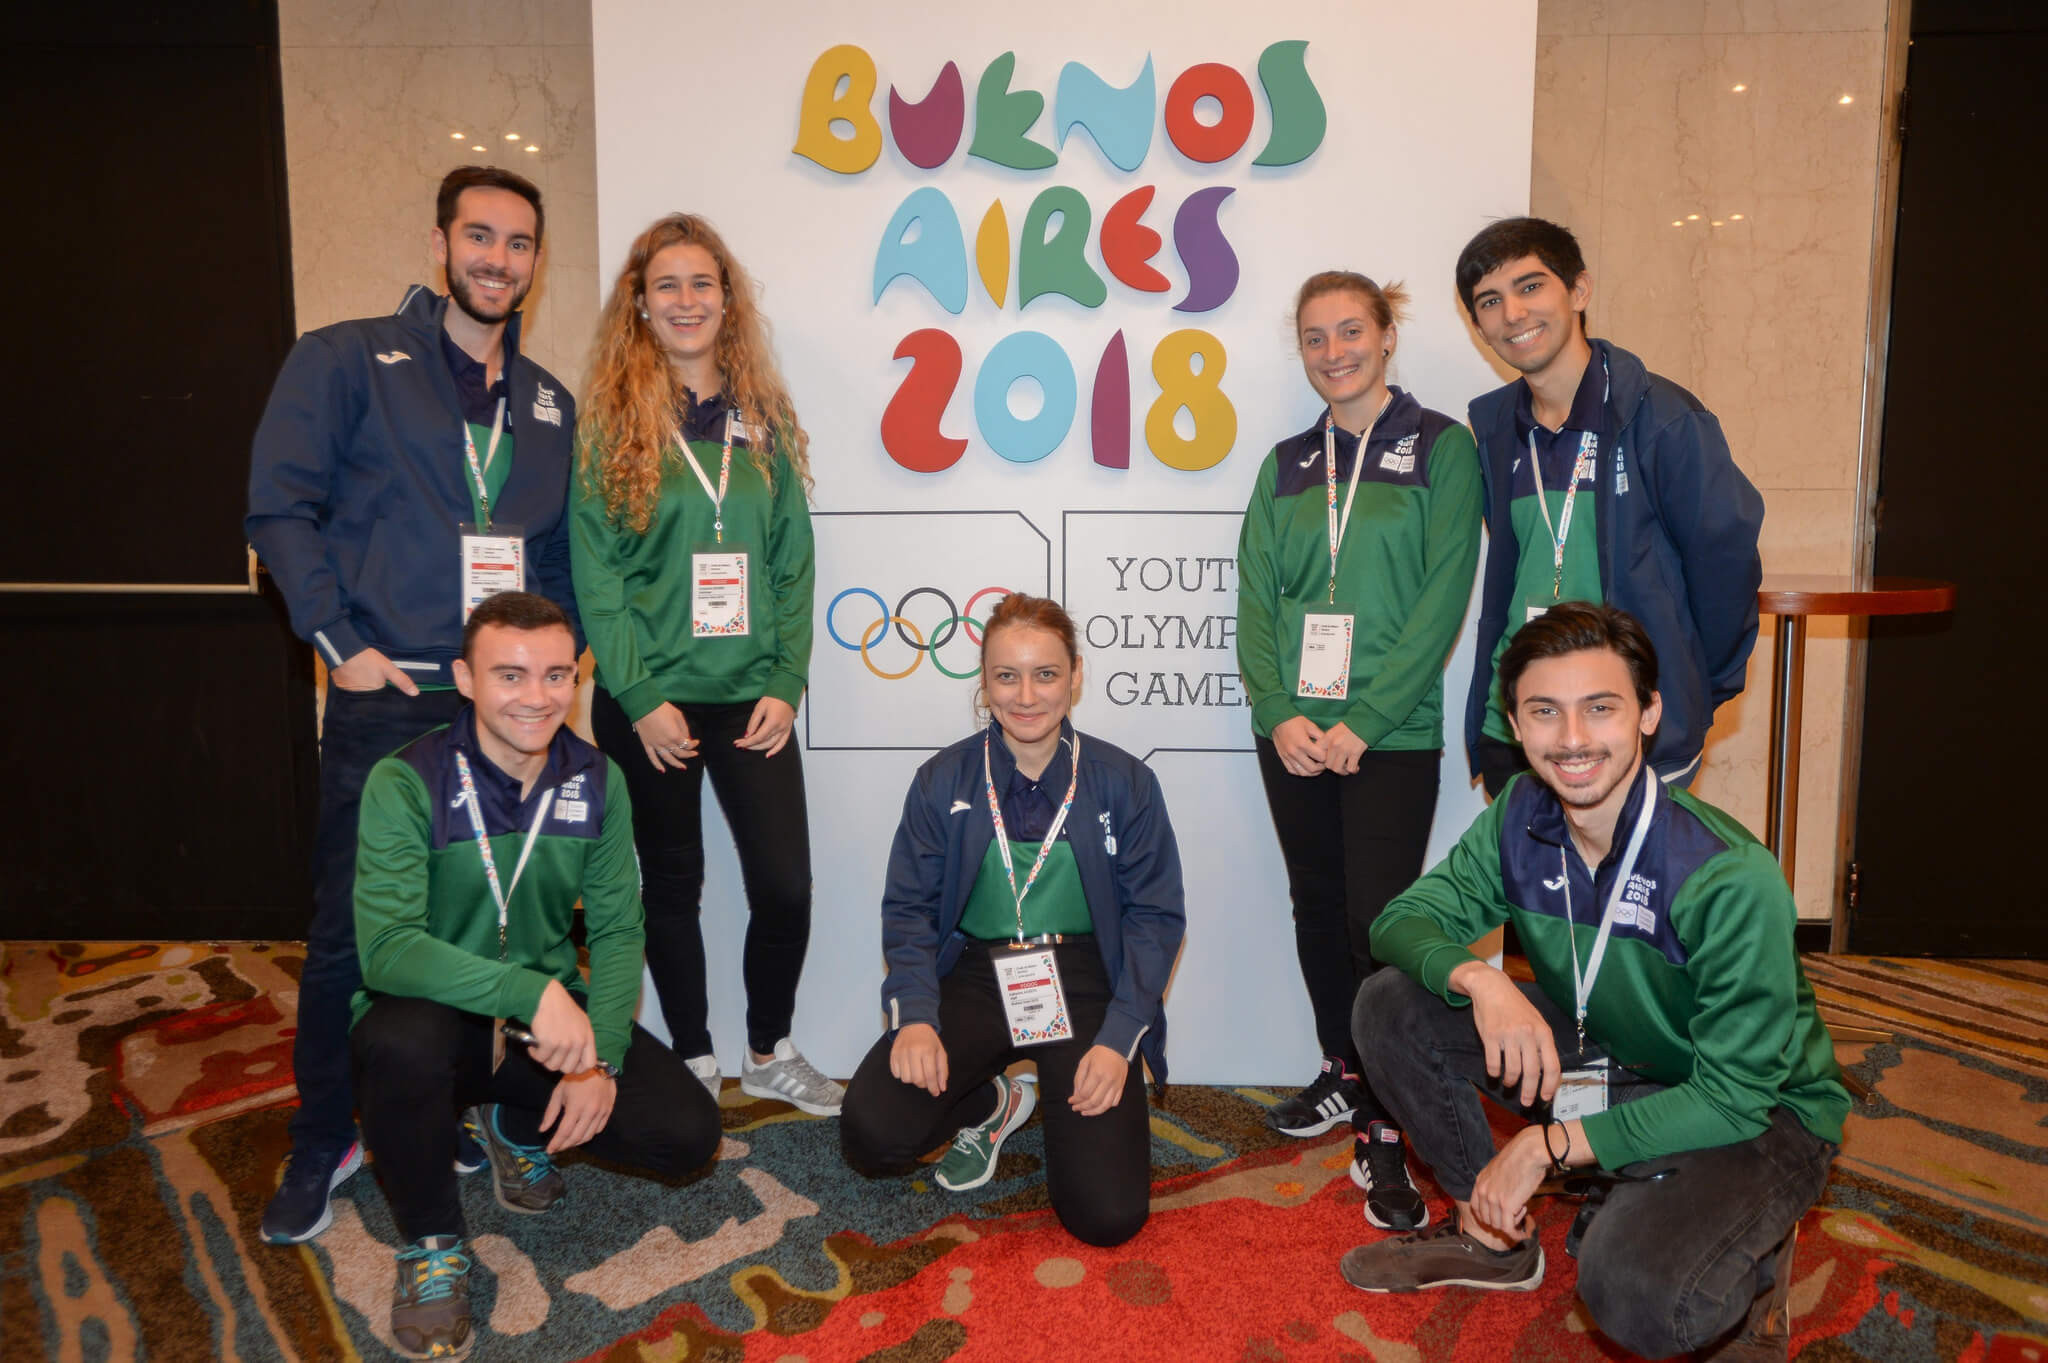 The Buenos Aires 2018 Youth Olympic Games are due to take place from October 6 to 18 ©Buenos Aires 2018